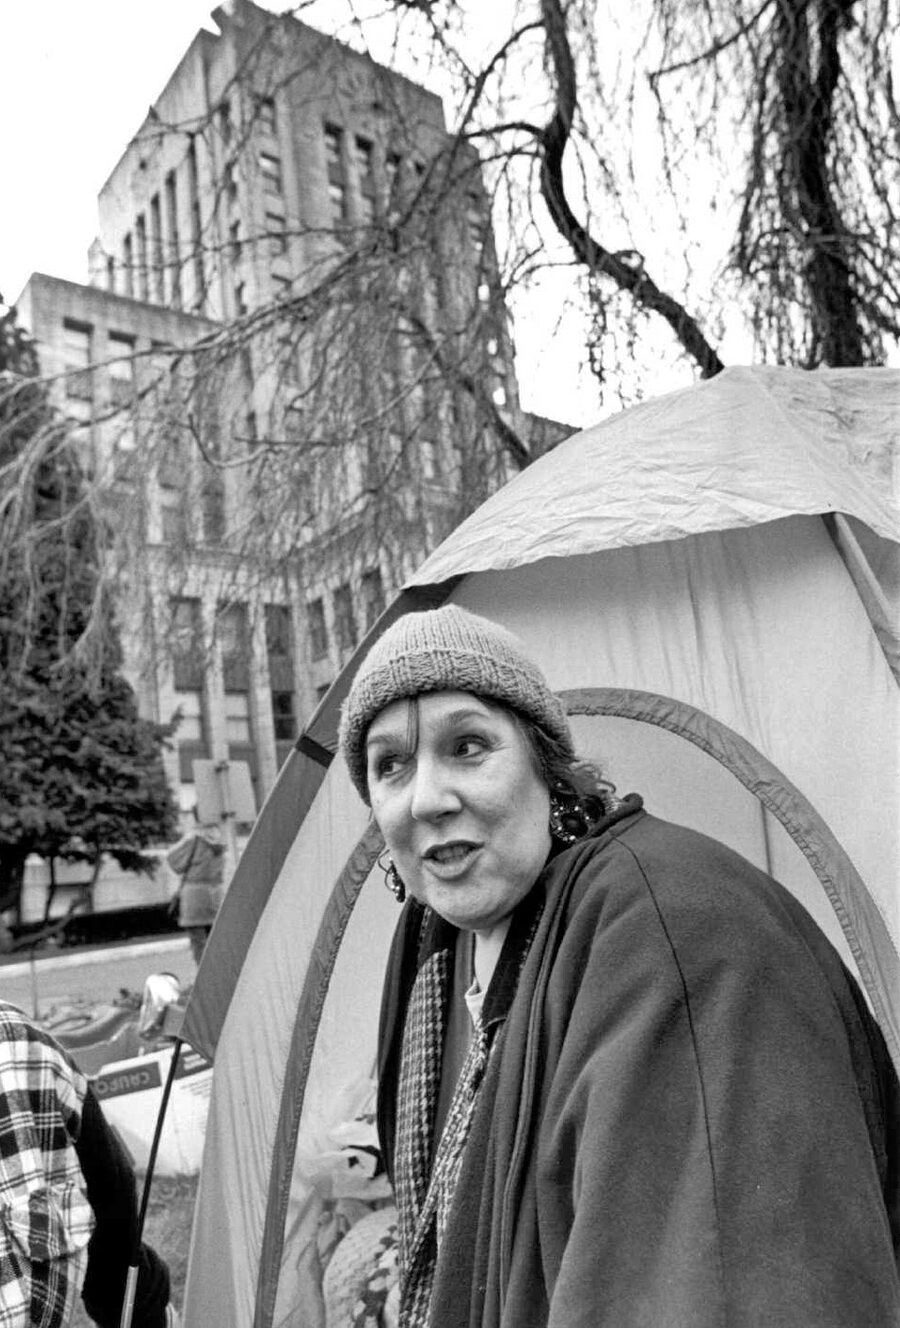 Vancouver sex worker Jamie Lee Hamilton camps in front of city hall during a rally to pressure the city to fund a drop-in centre for prostitutes, on Jan. 29, 1998. Christopher Grabowski, The Globe and Mail